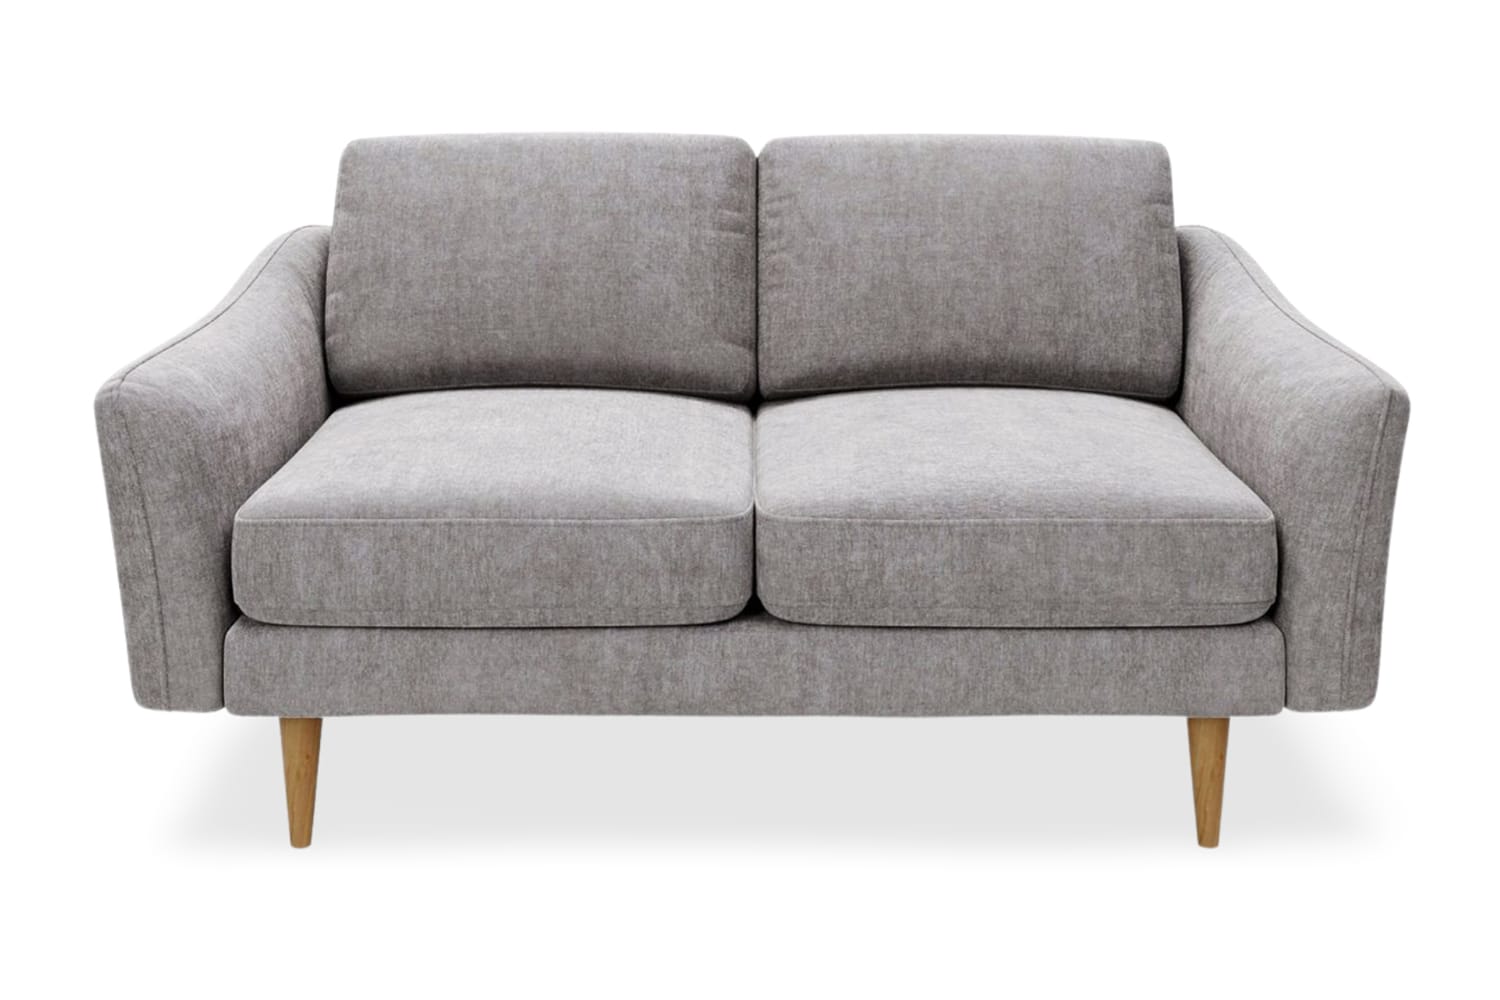 SNUG | The Rebel 2 Seater Sofa in Mid Grey variant_40414889377840